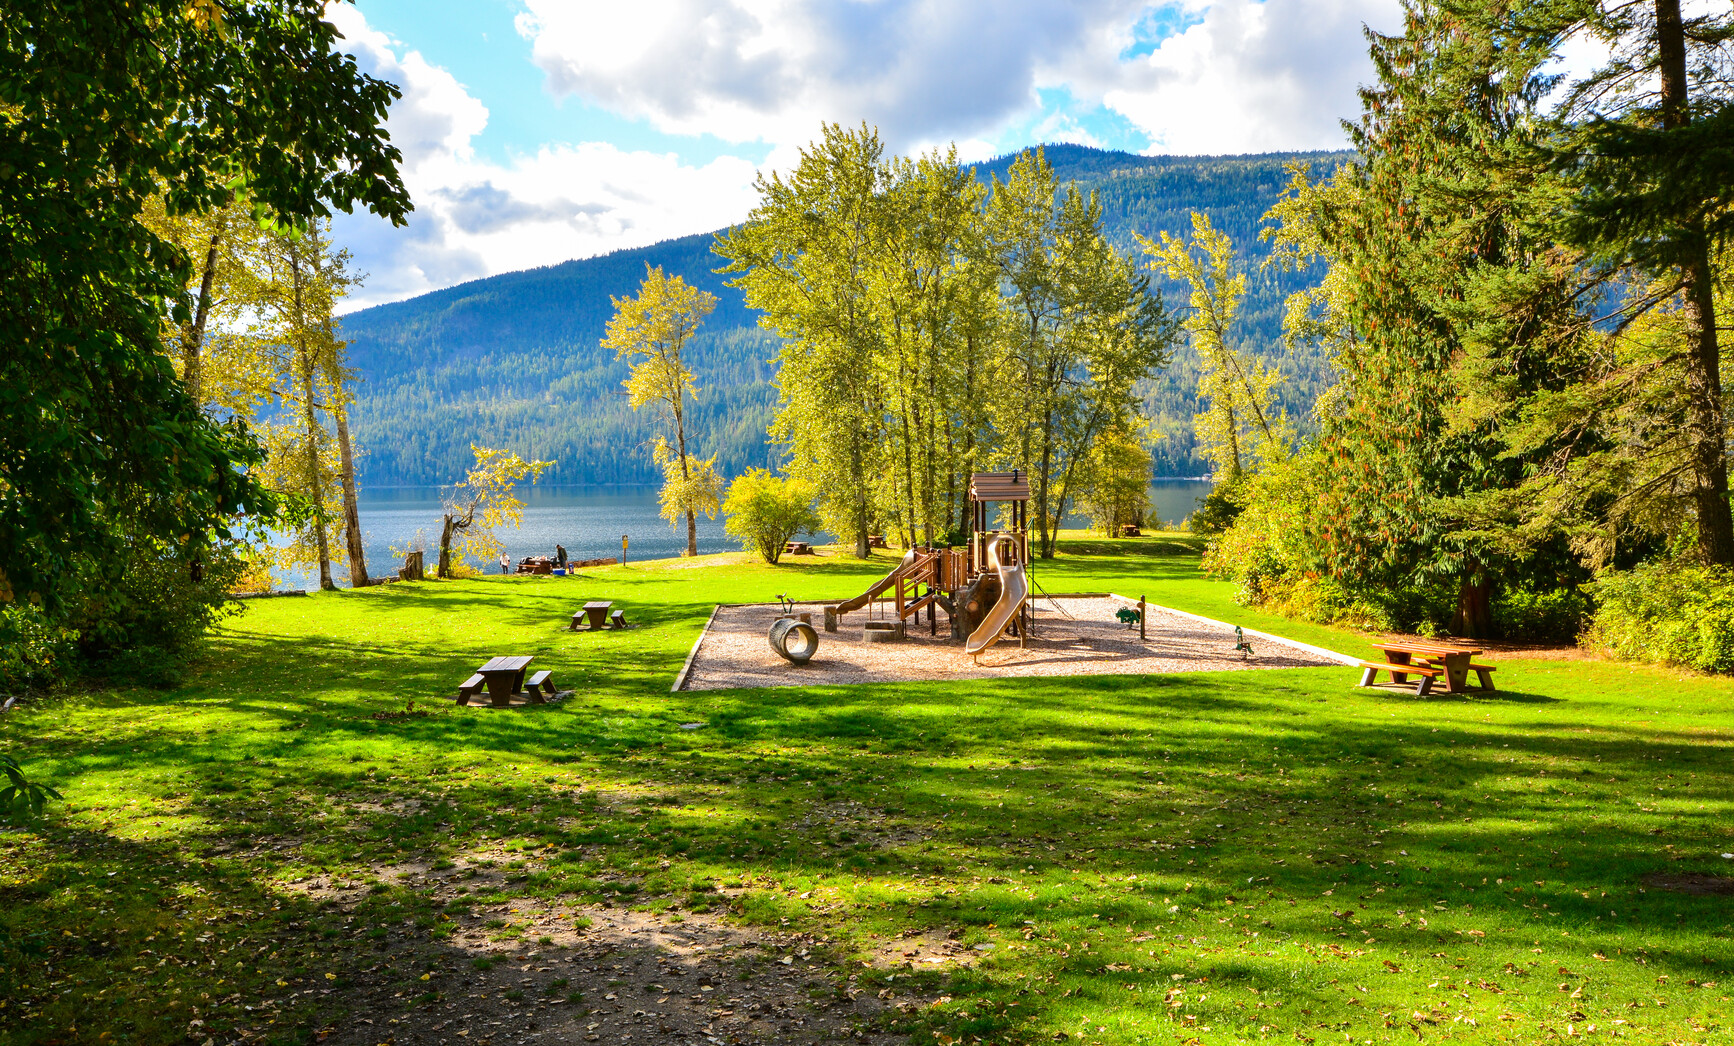 A playground at Mabel Lake Park in the picnic area. Across the lake are forest covered mountains.